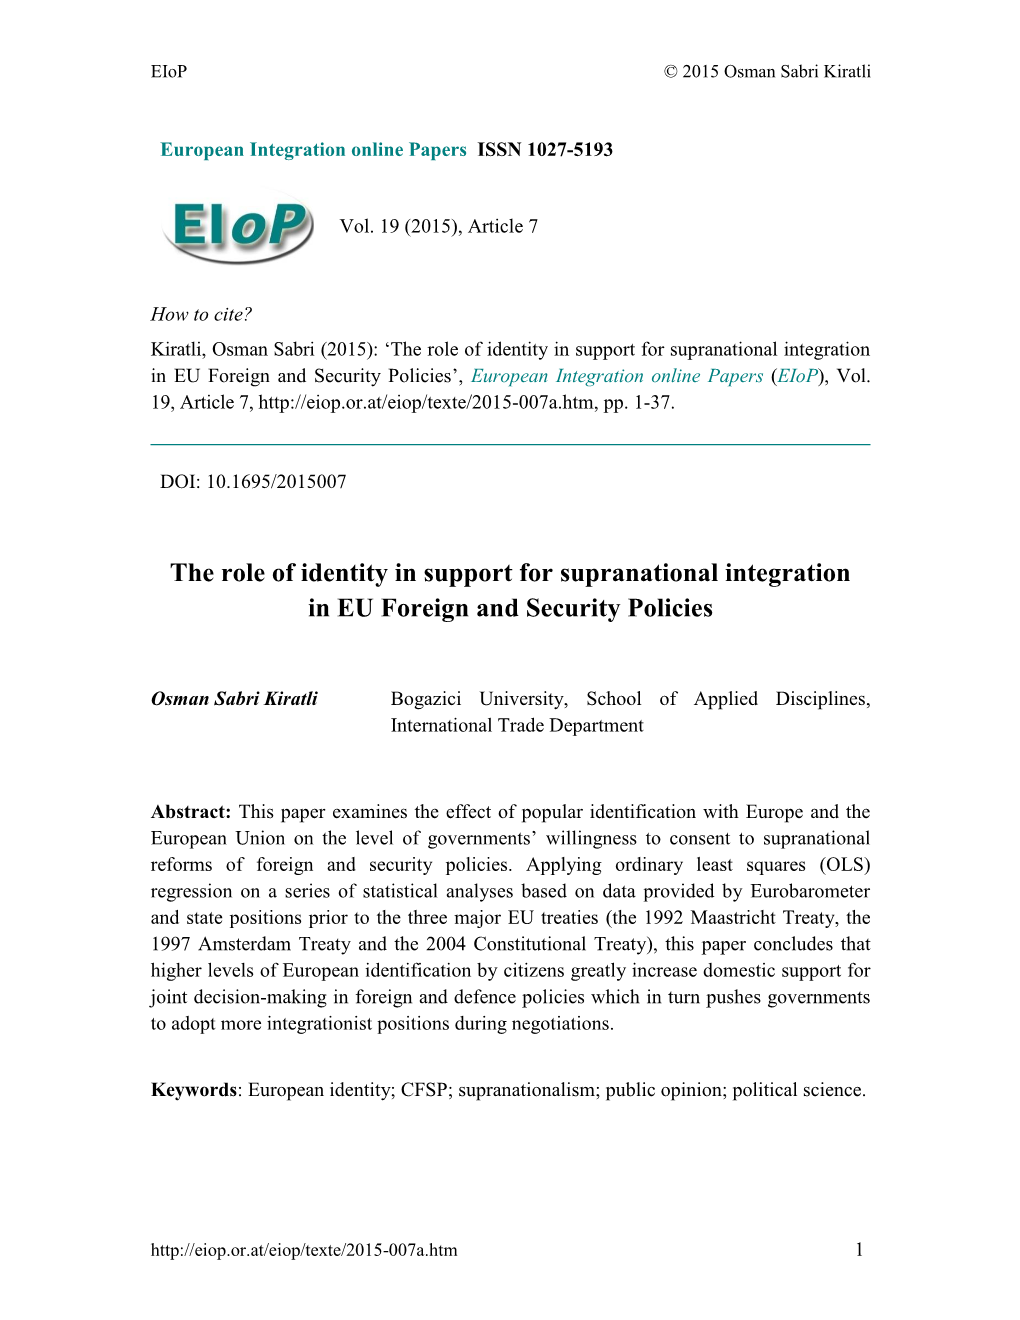 The Role of Identity in Support for Supranational Integration in EU Foreign and Security Policies’, European Integration Online Papers (Eiop), Vol